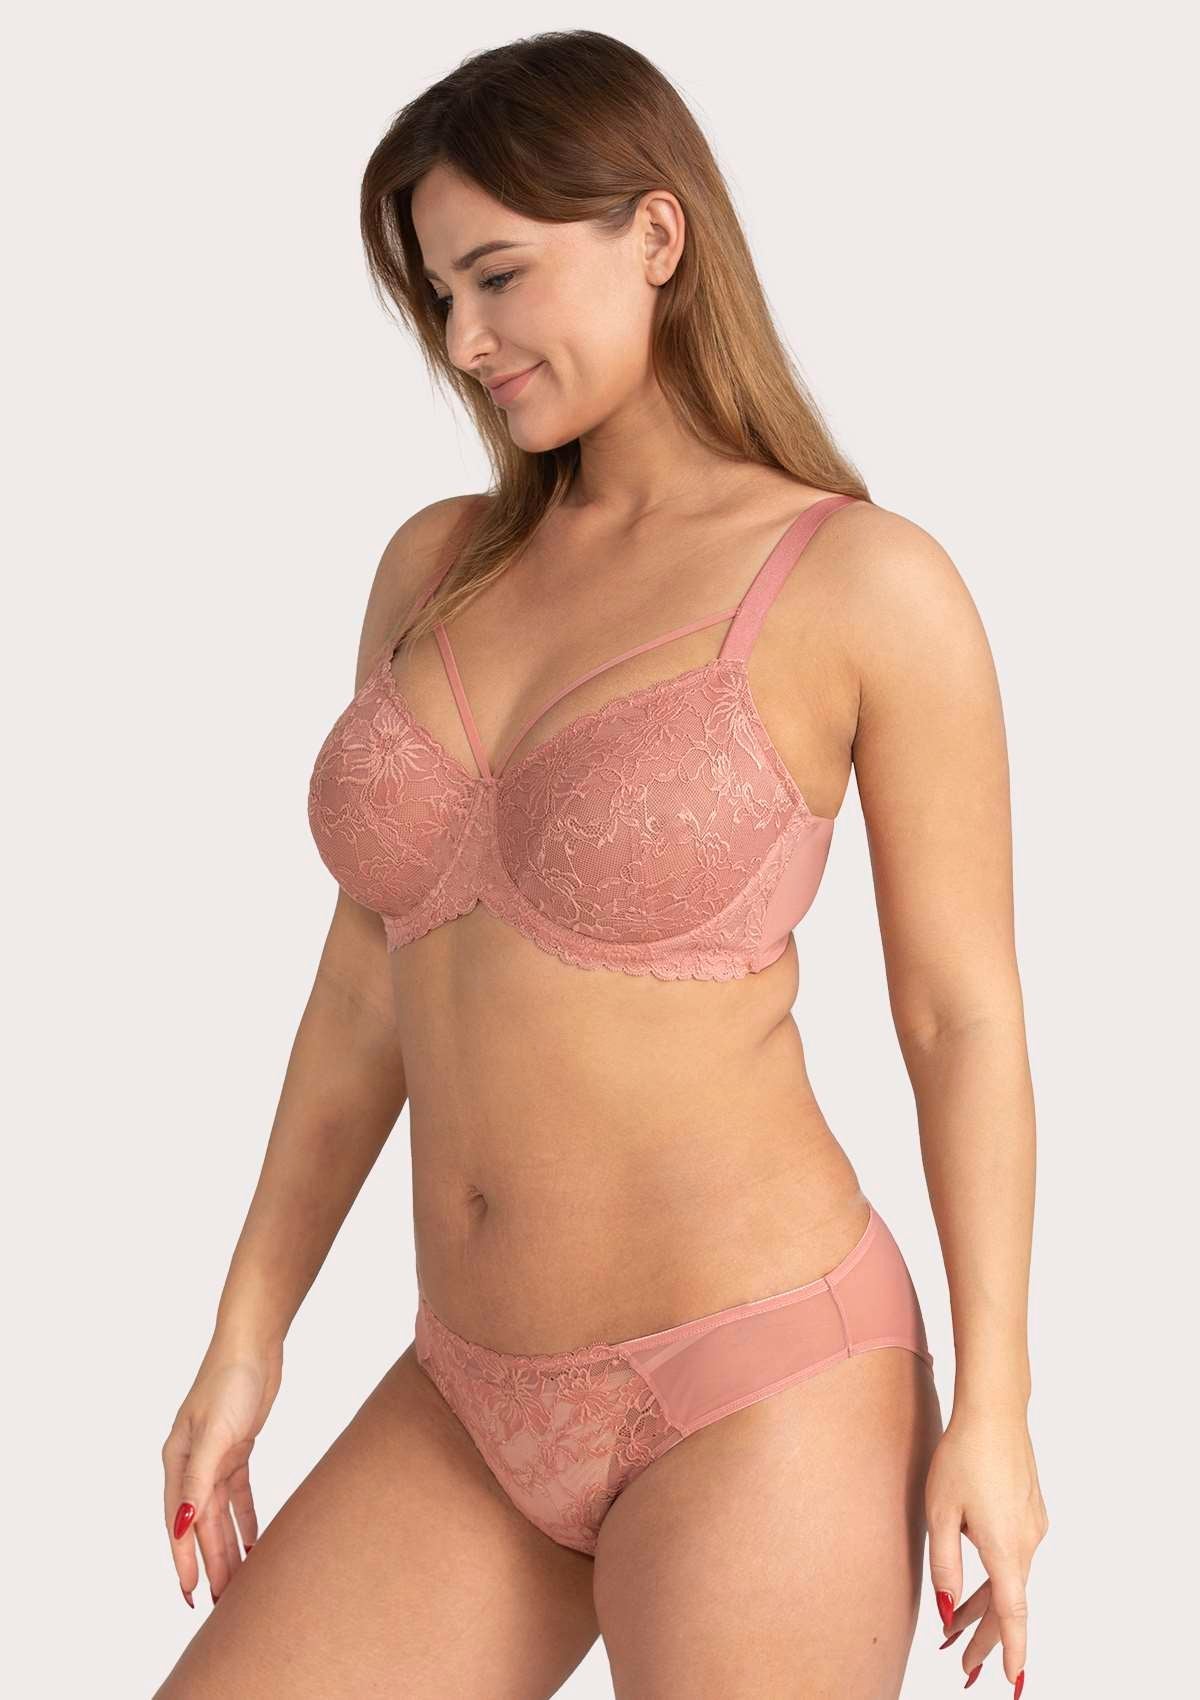 HSIA Pretty In Petals Lace Bra And Panty Sets: Bra For Big Boobs - Light Coral / 42 / D